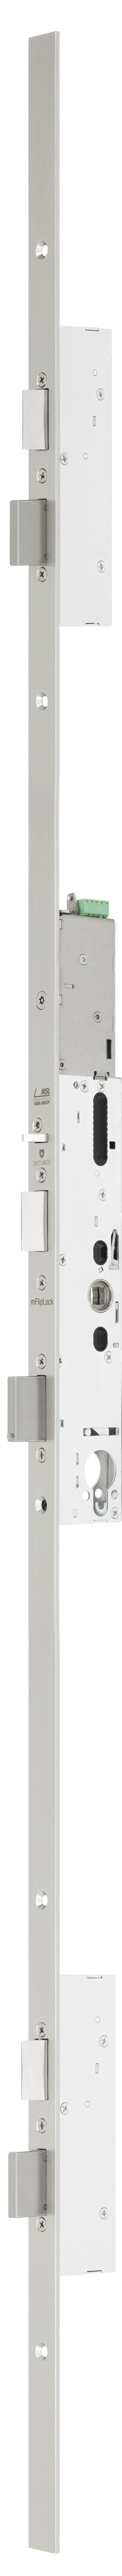 Panic security multi-point locking system, motorised, with contacts, external evaluation control and panic function E, automatic locking 25574PE-SV-ZF